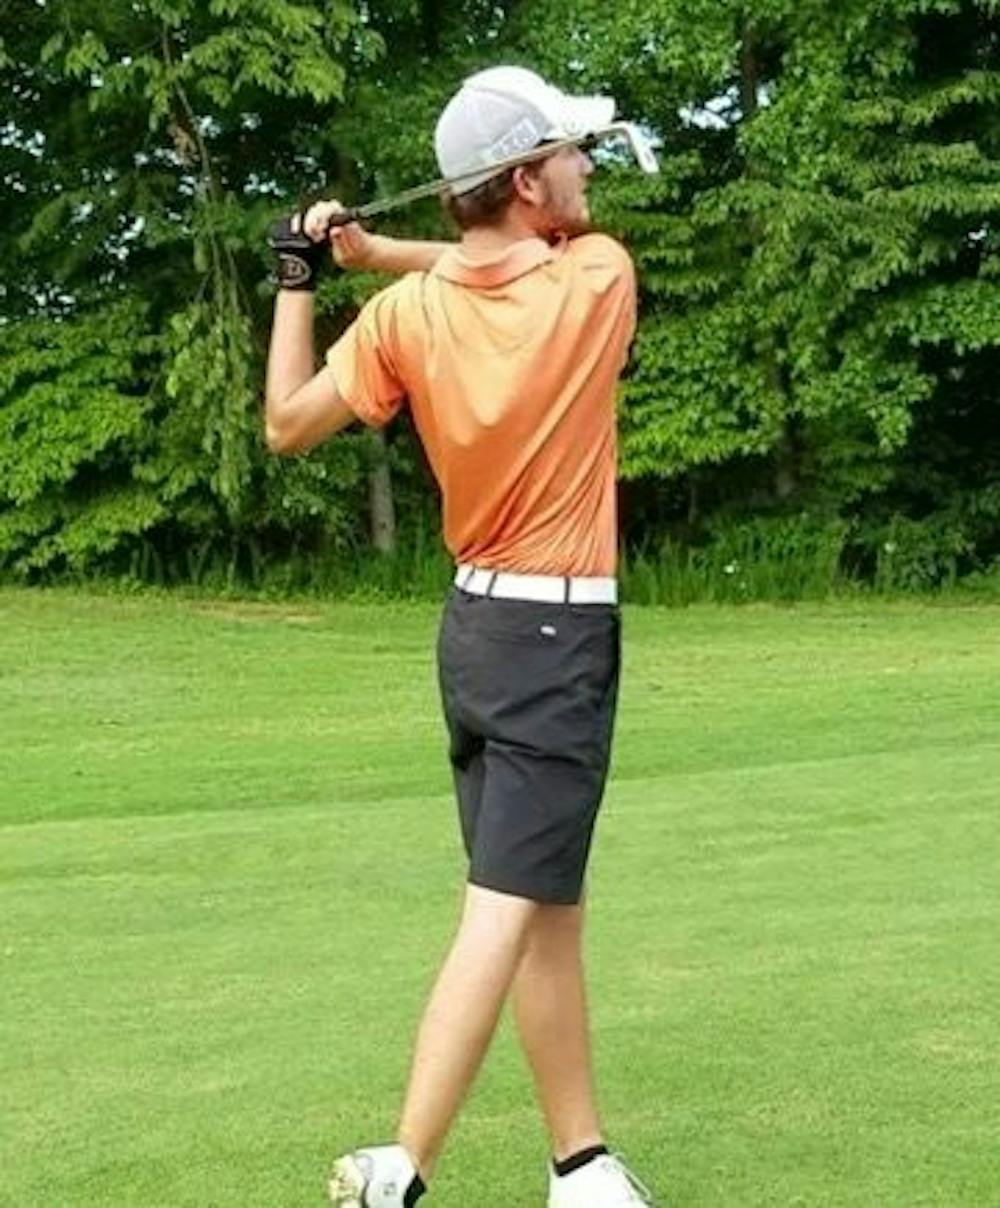 Sophomore T.J. Long helped start the Mercer club golf team in order to gain recognition from the varsity program. Photo courtesy of T.J. Long.